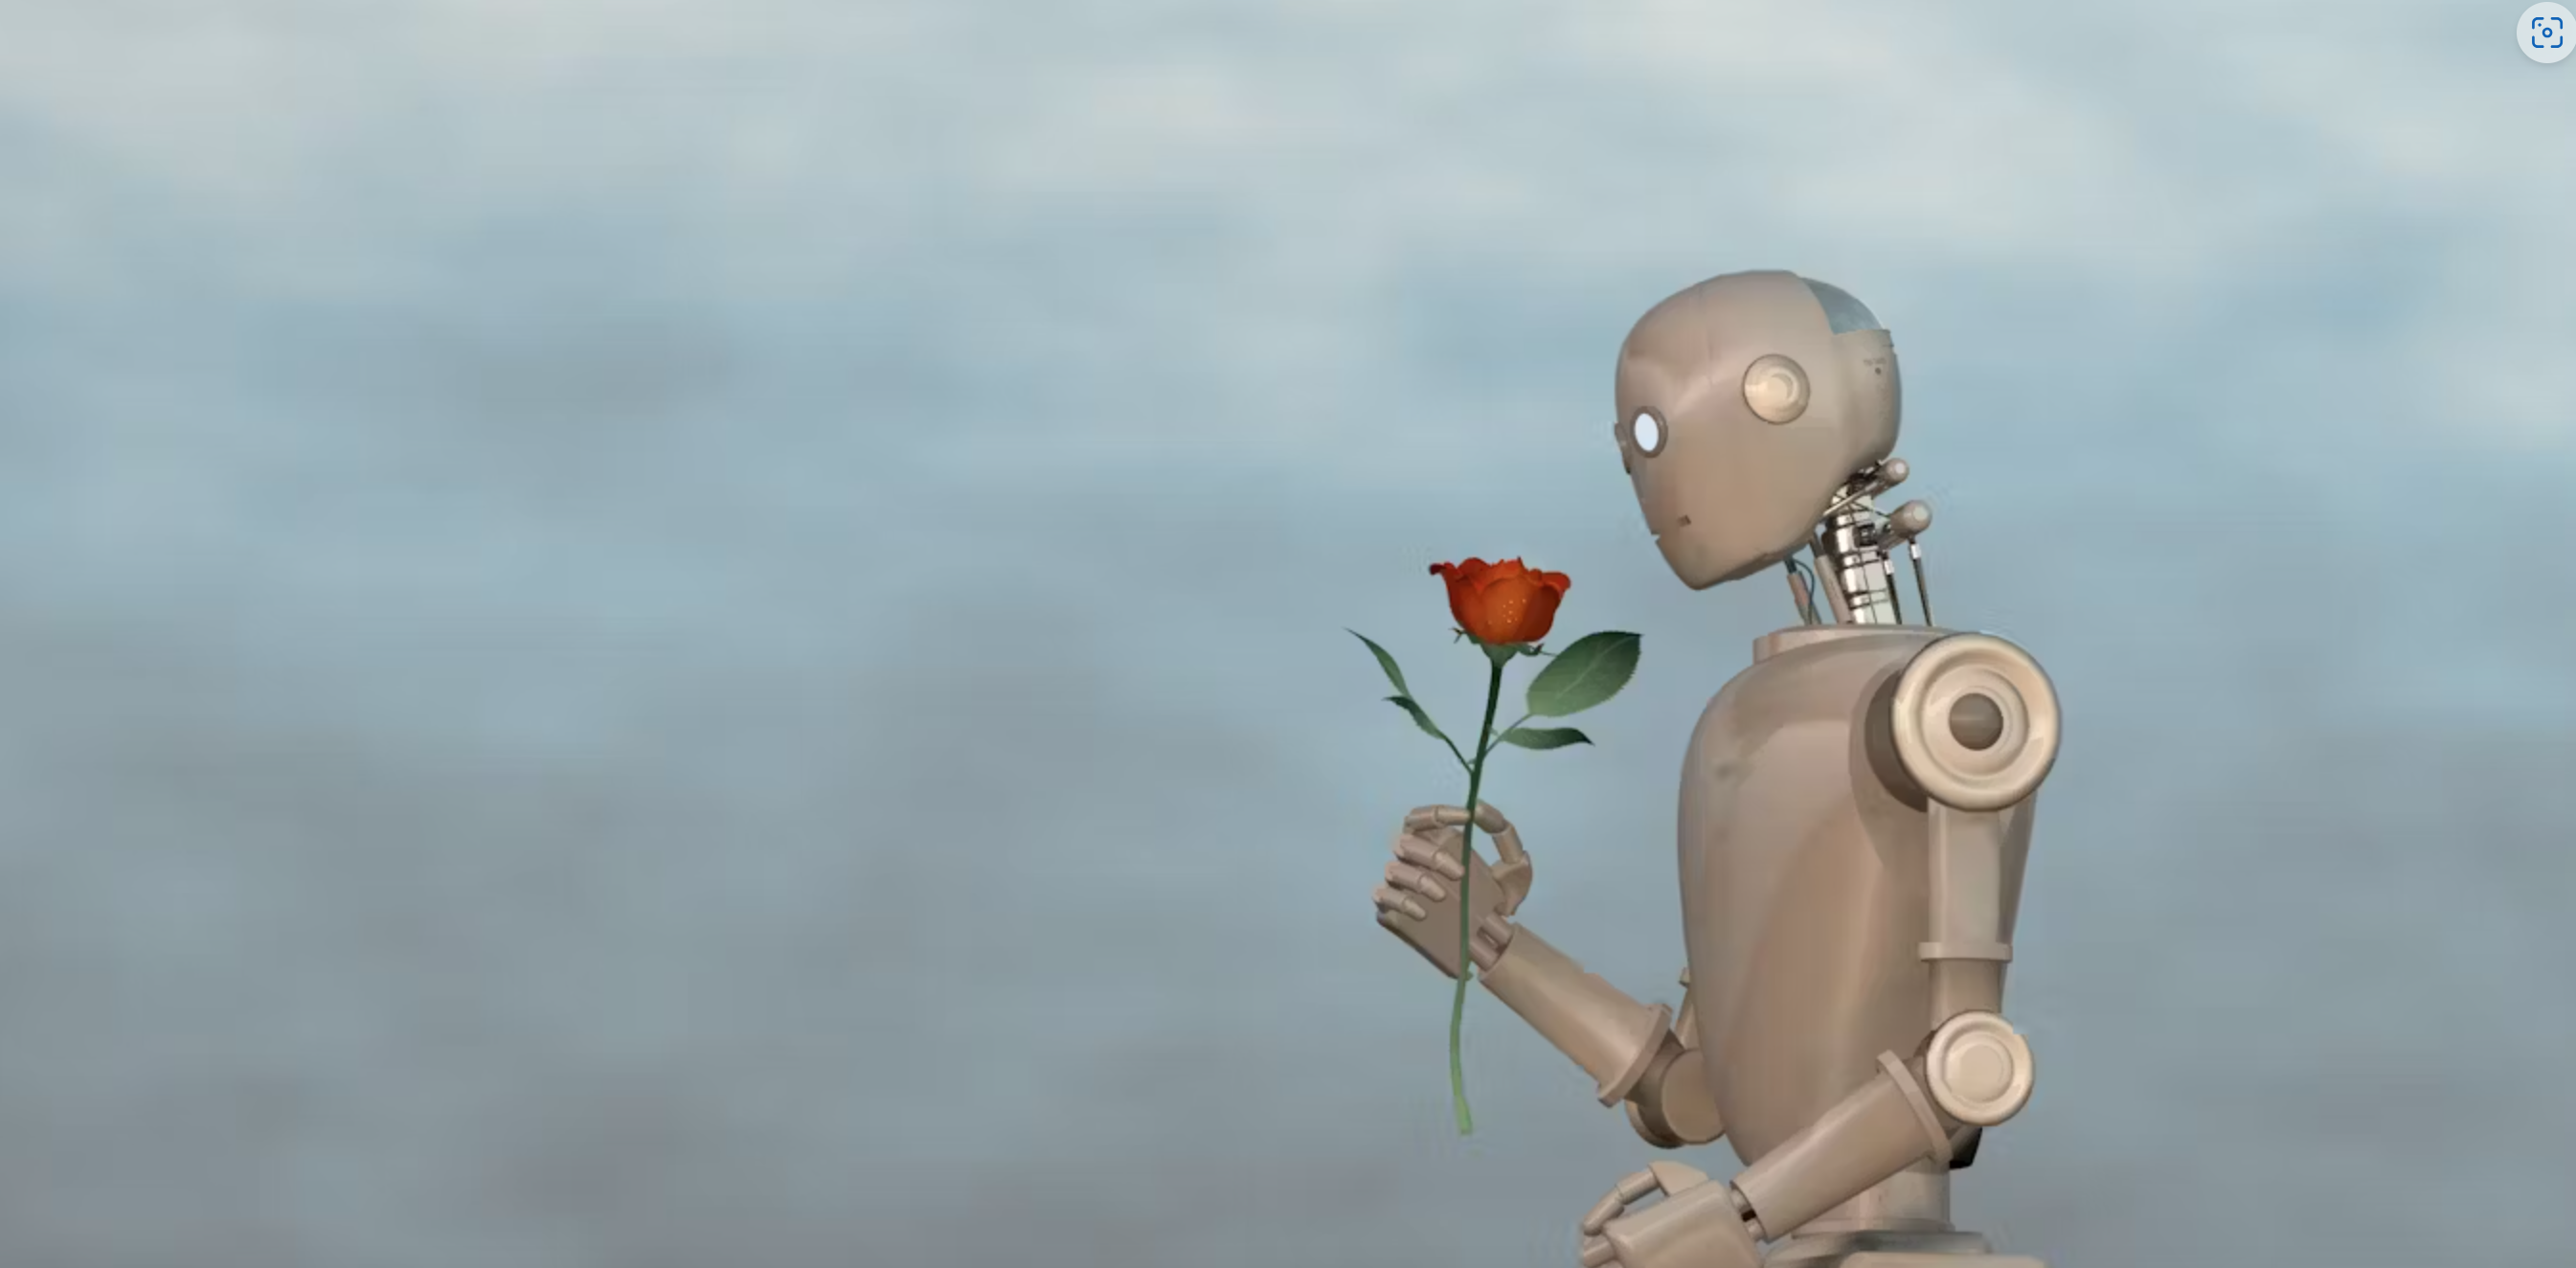 A rose by any other name would not smell as sweet to a robot